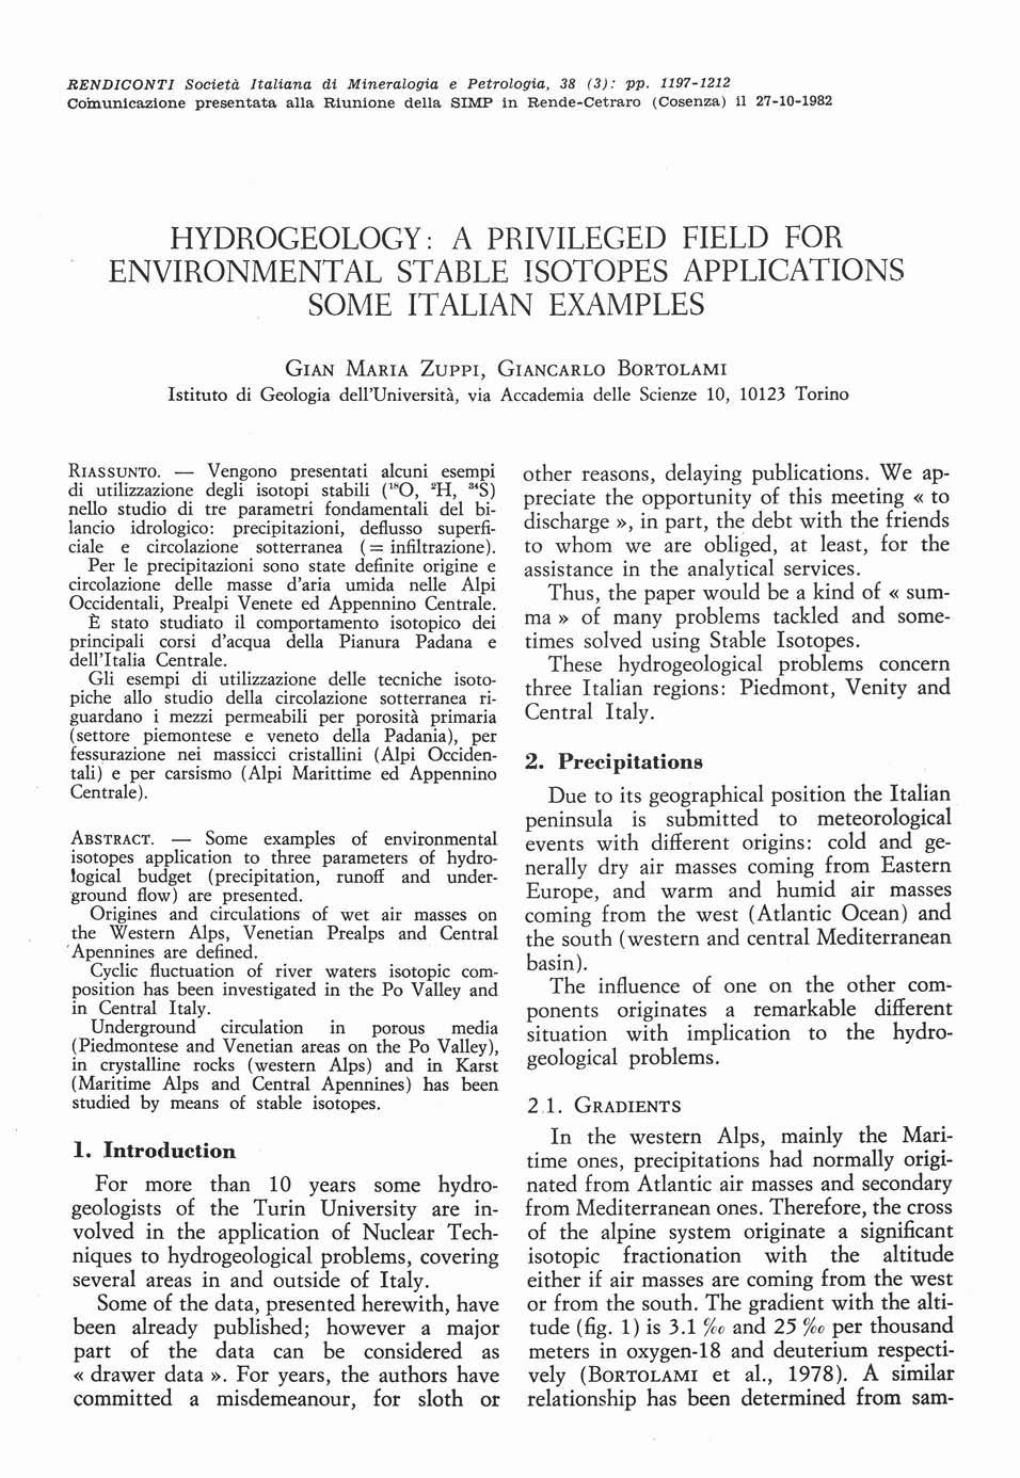 Hydrogeology: a Phivileged Field for Environmental Stable Isotopes Applications Some Italian Examples